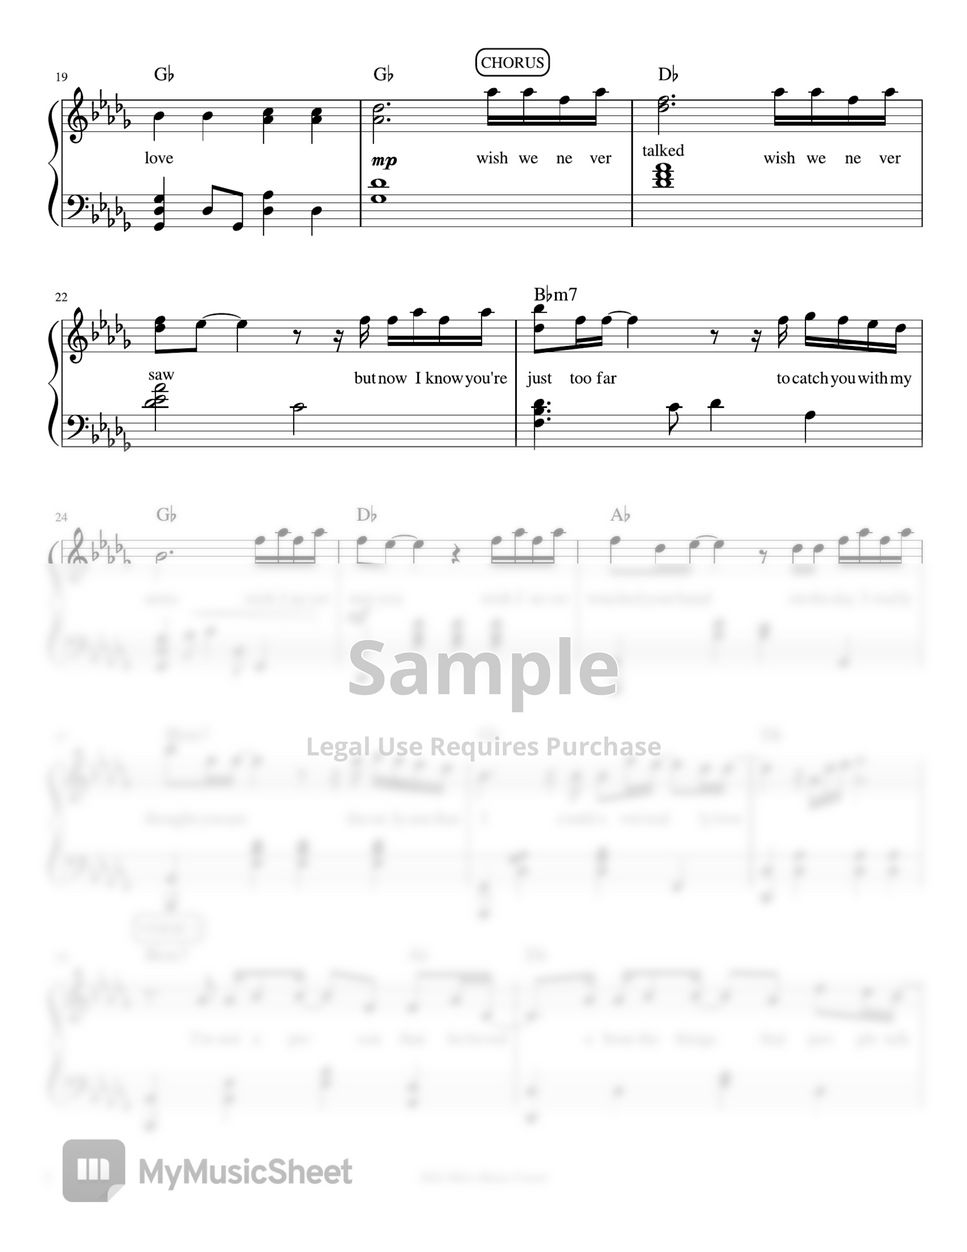 jamie-miller-wishes-piano-sheet-music-sheets-by-mel-s-music-corner